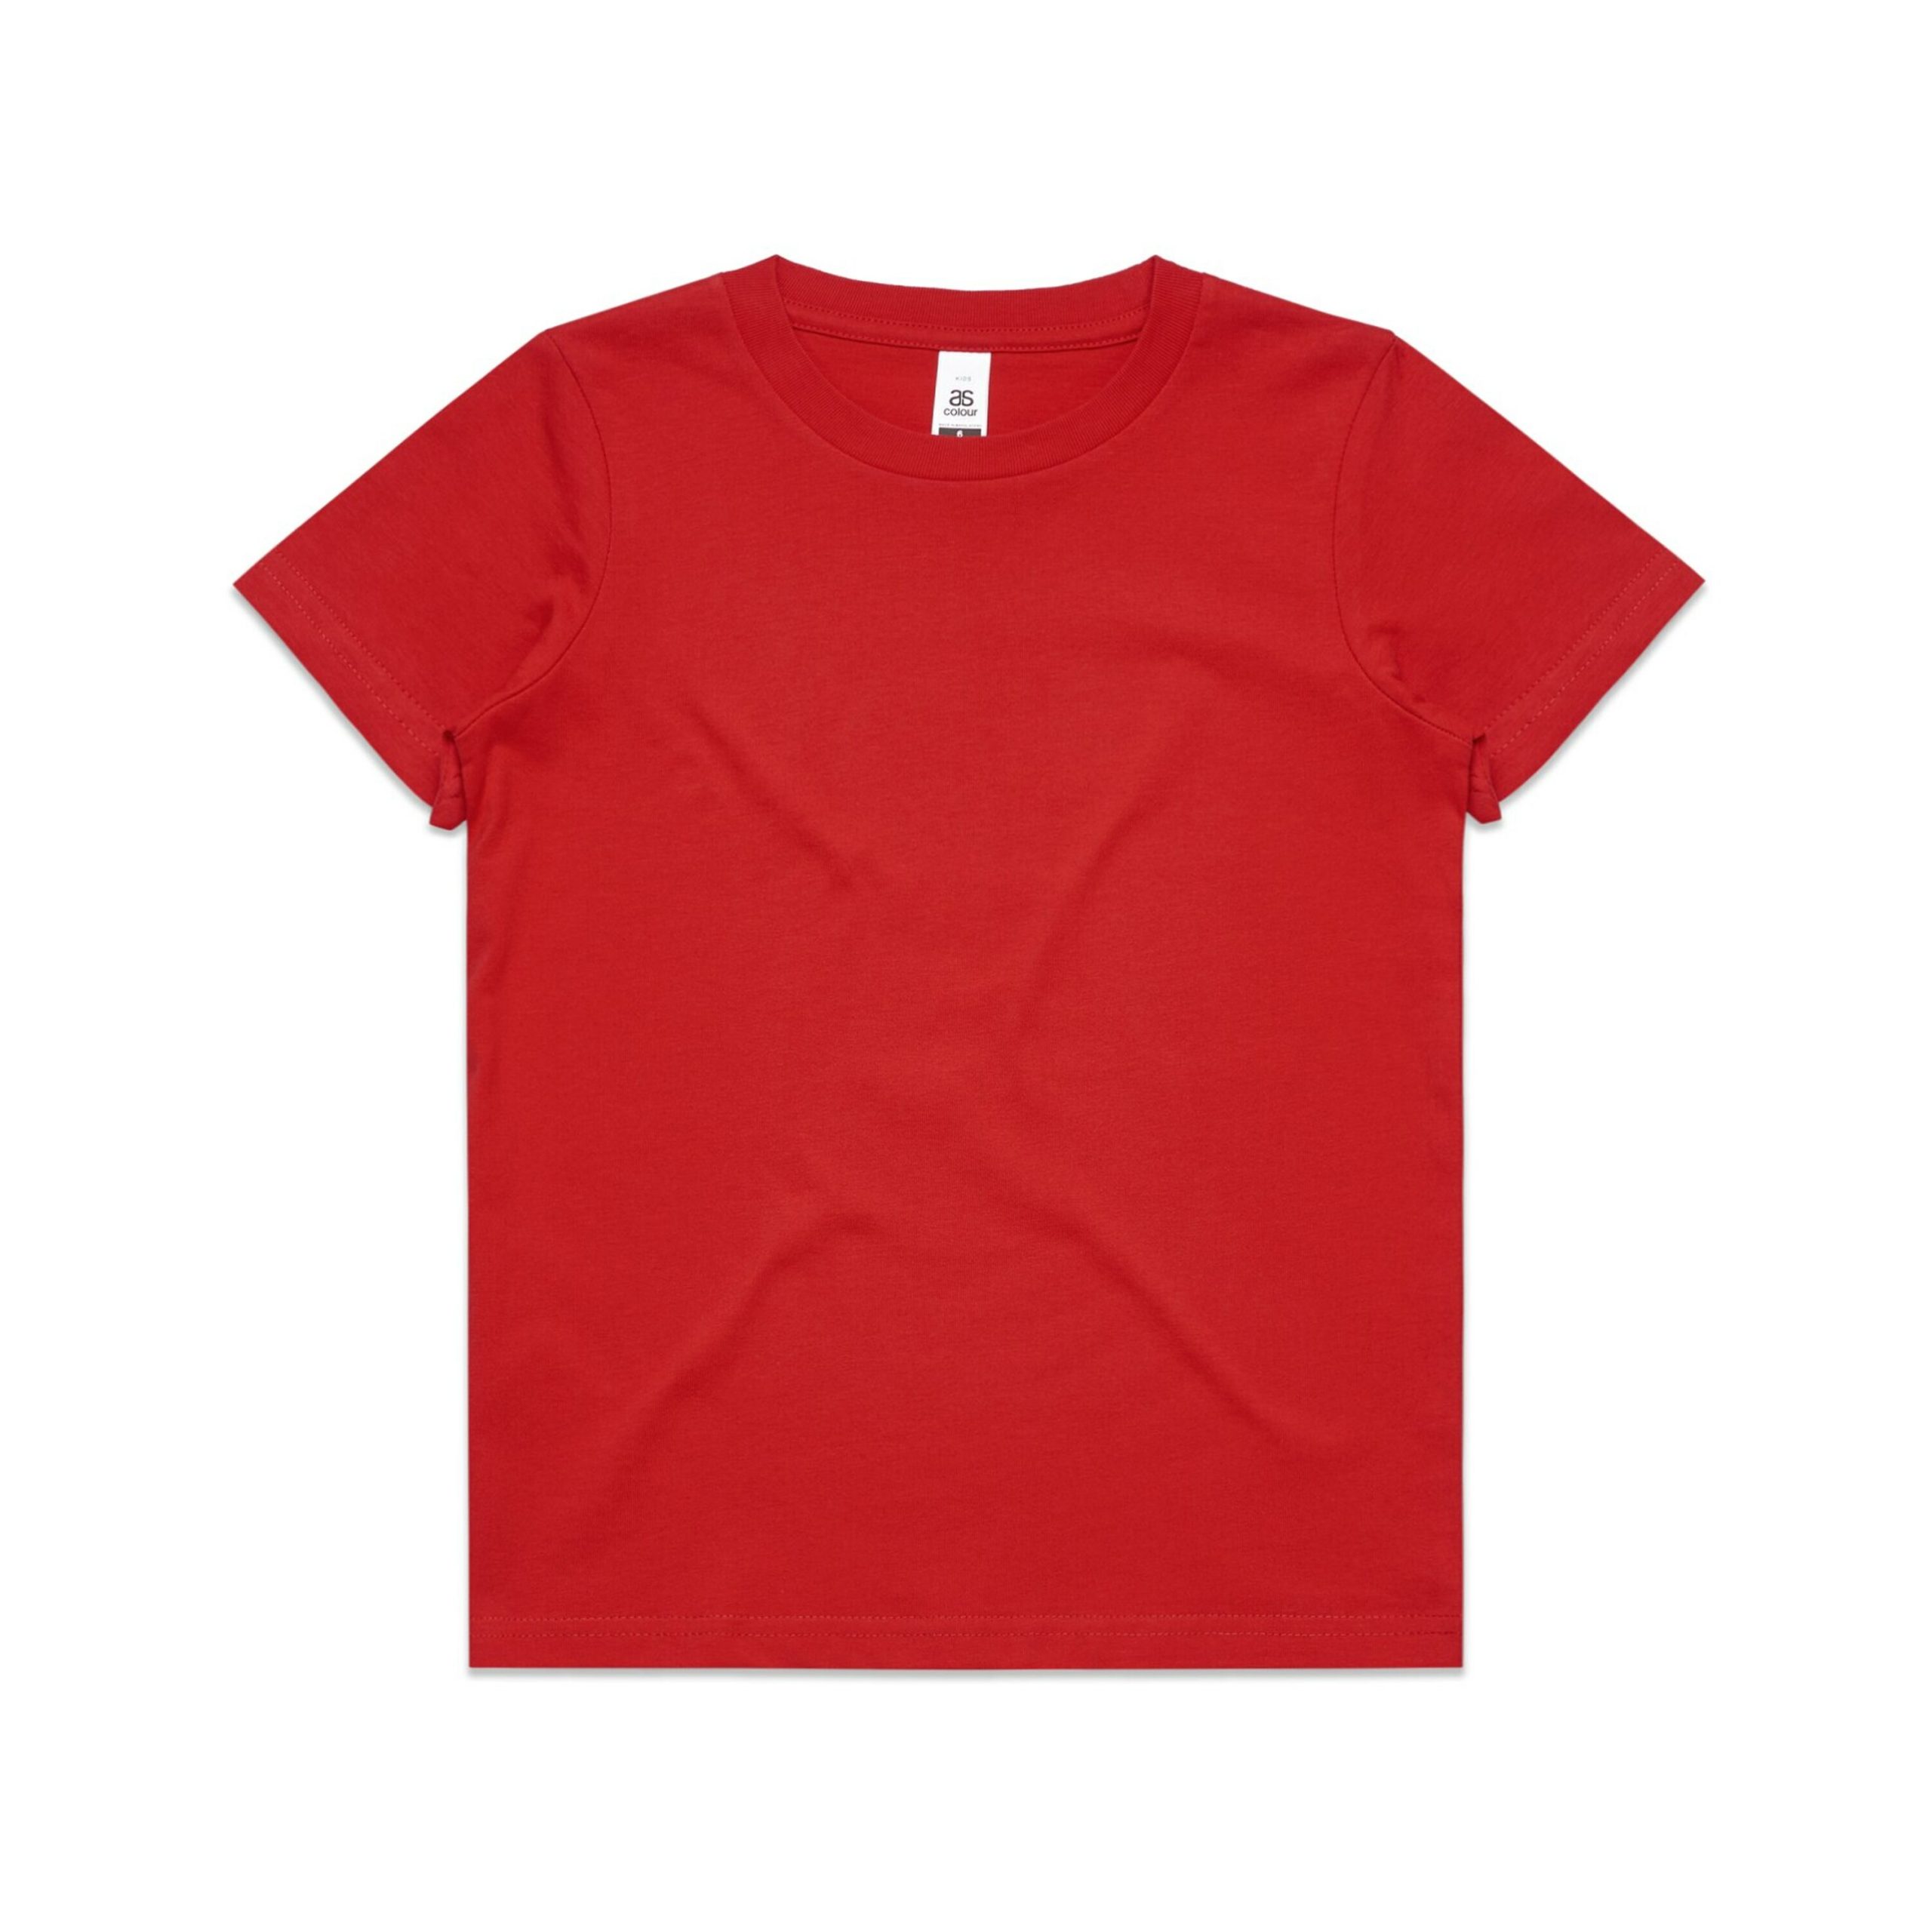 3006_AS_Youth-Tee_Red-scaled